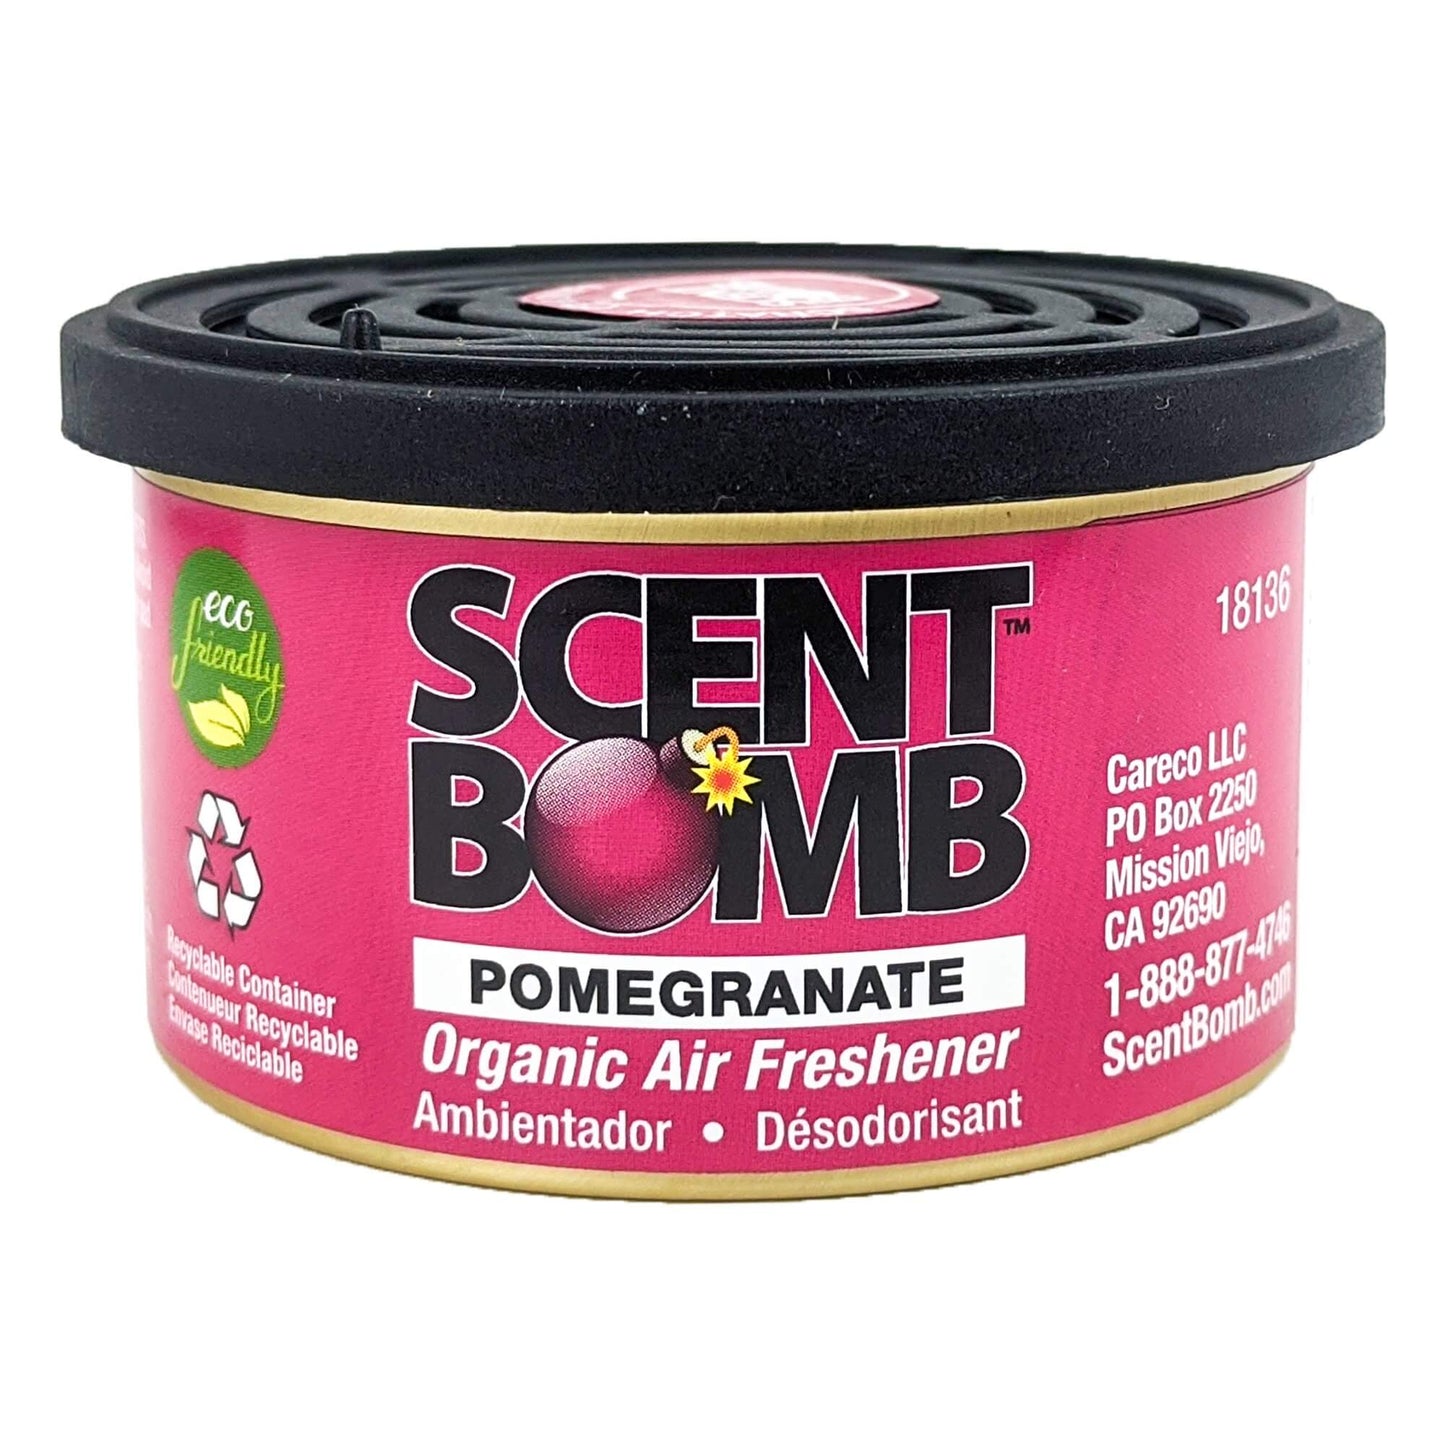 Pomegranate Scent Bomb Organic Air Freshener Scent Can